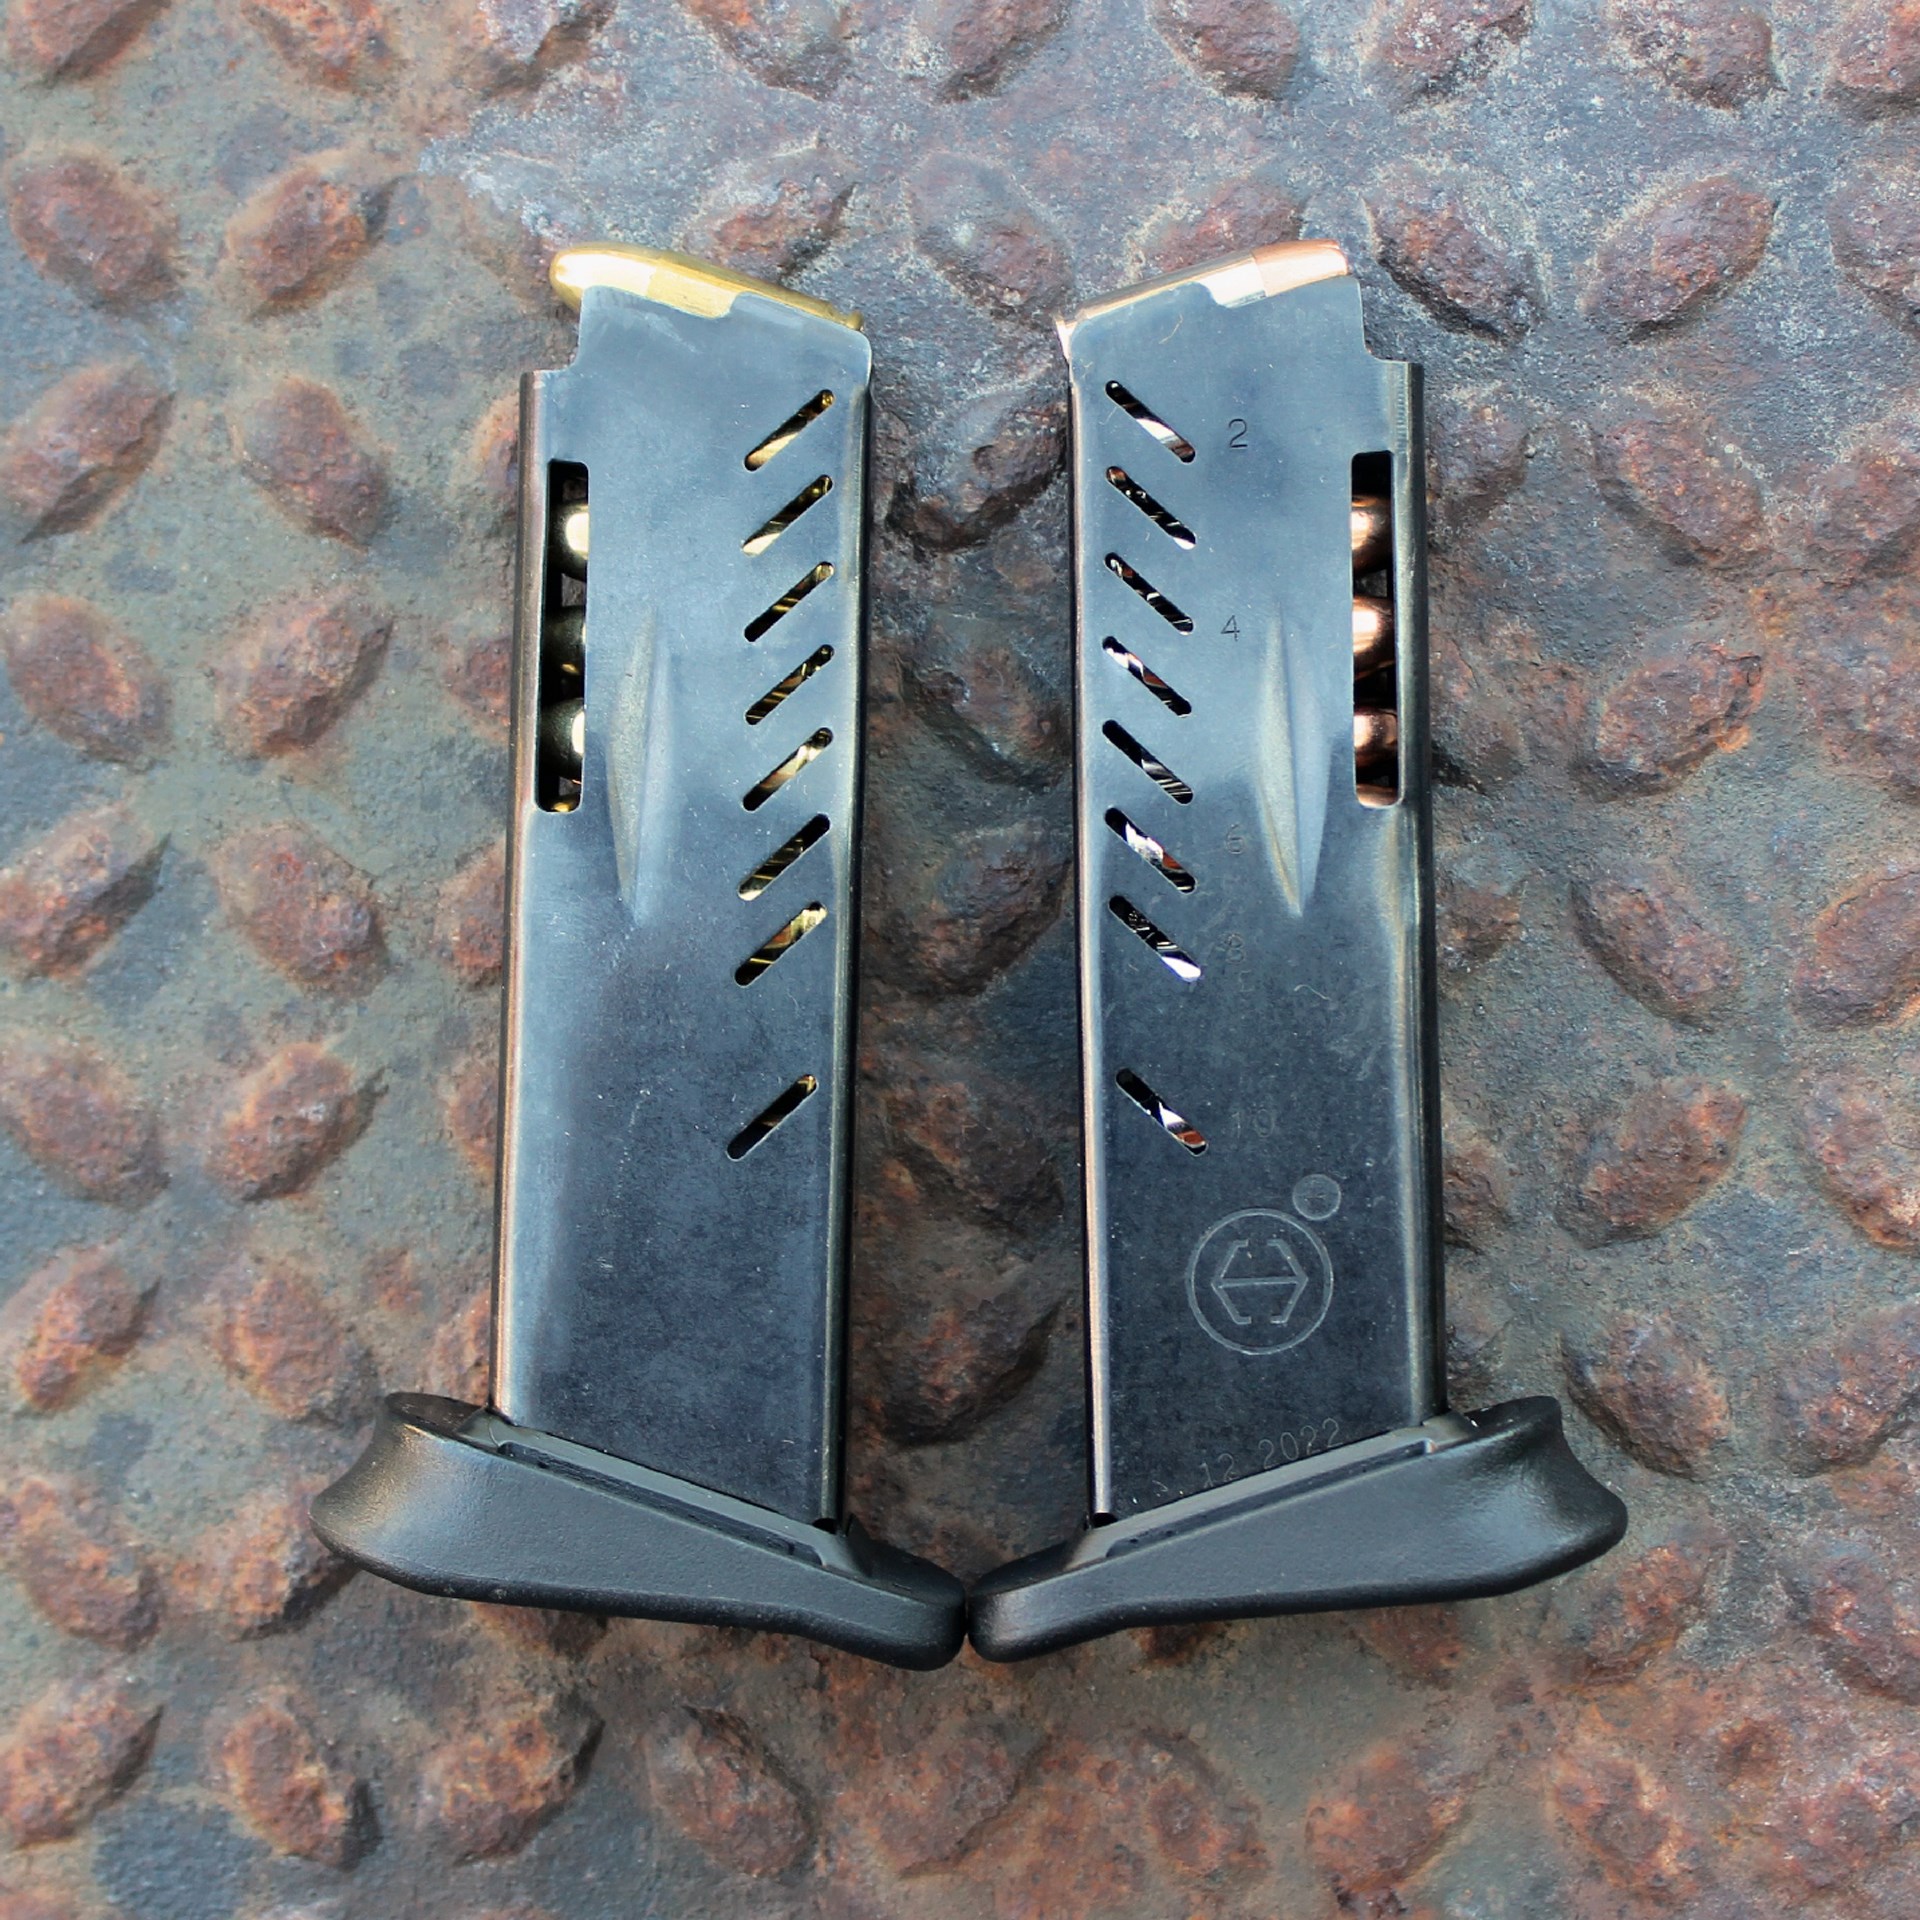 Hi-Point Firearms YC9RD handgun magazines two mags opposing each other with ammunition black steel lightening cuts shown on rusty metal treadplate background